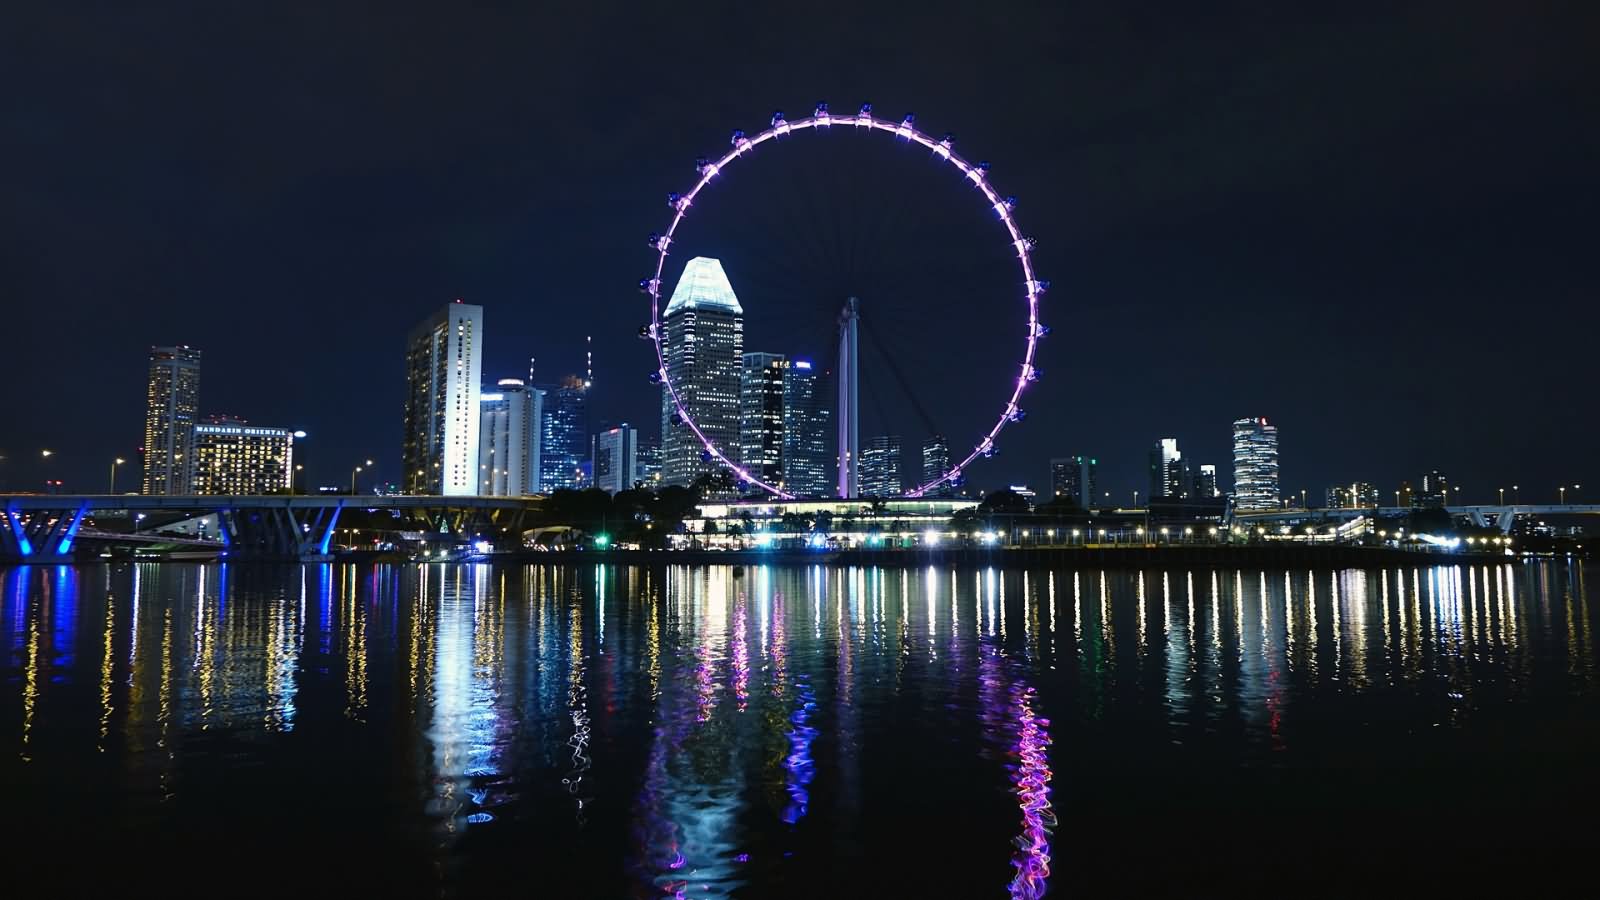 Singapore Flyer Night Picture